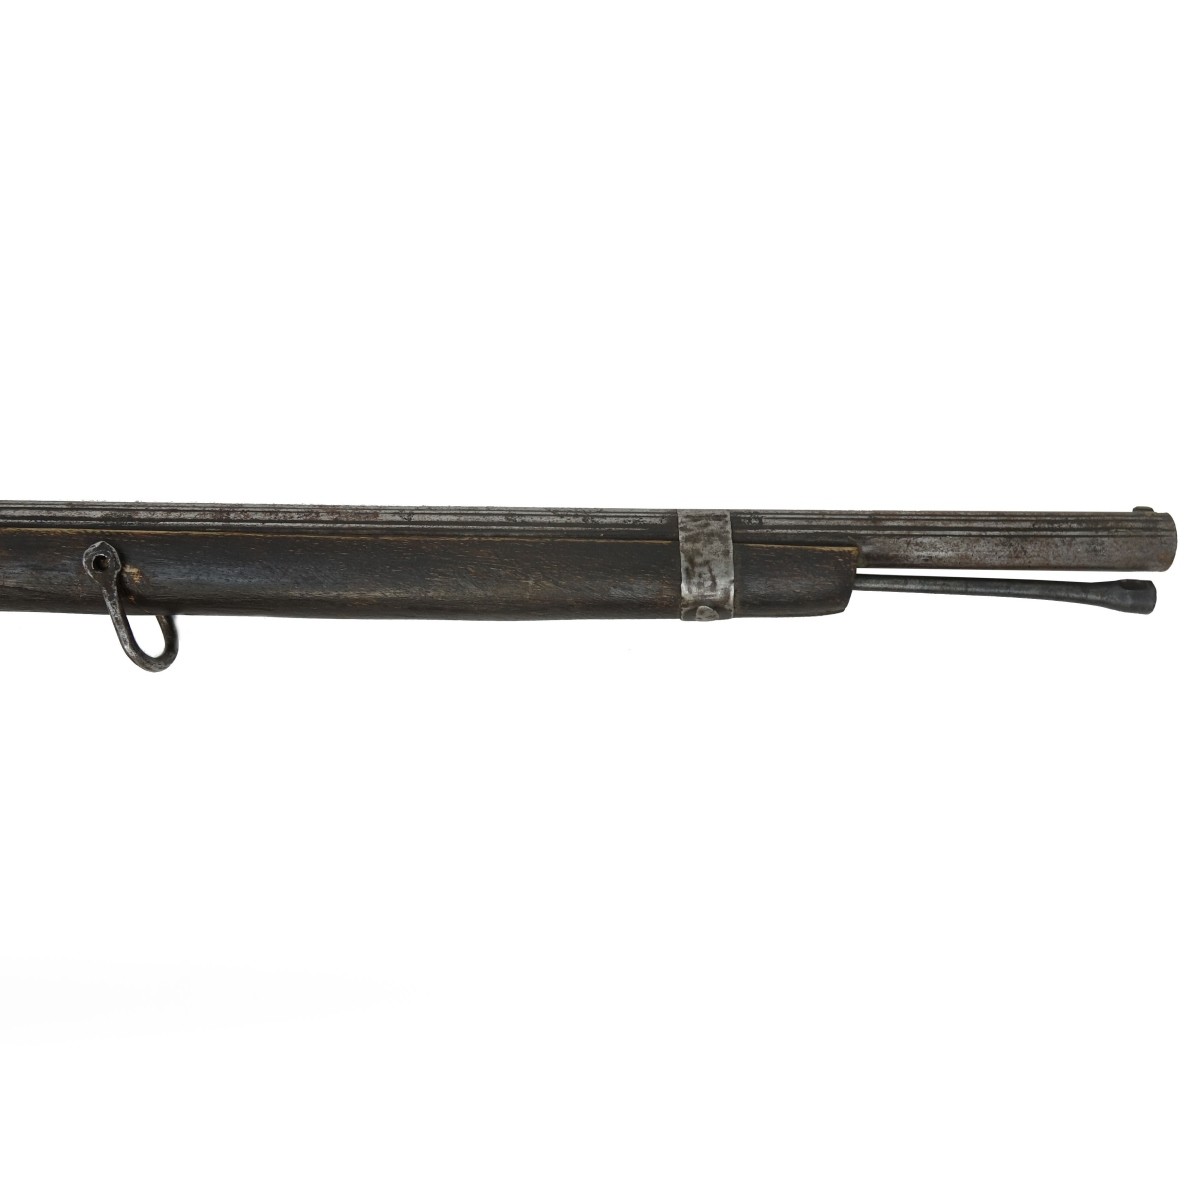 Antique North African Musket